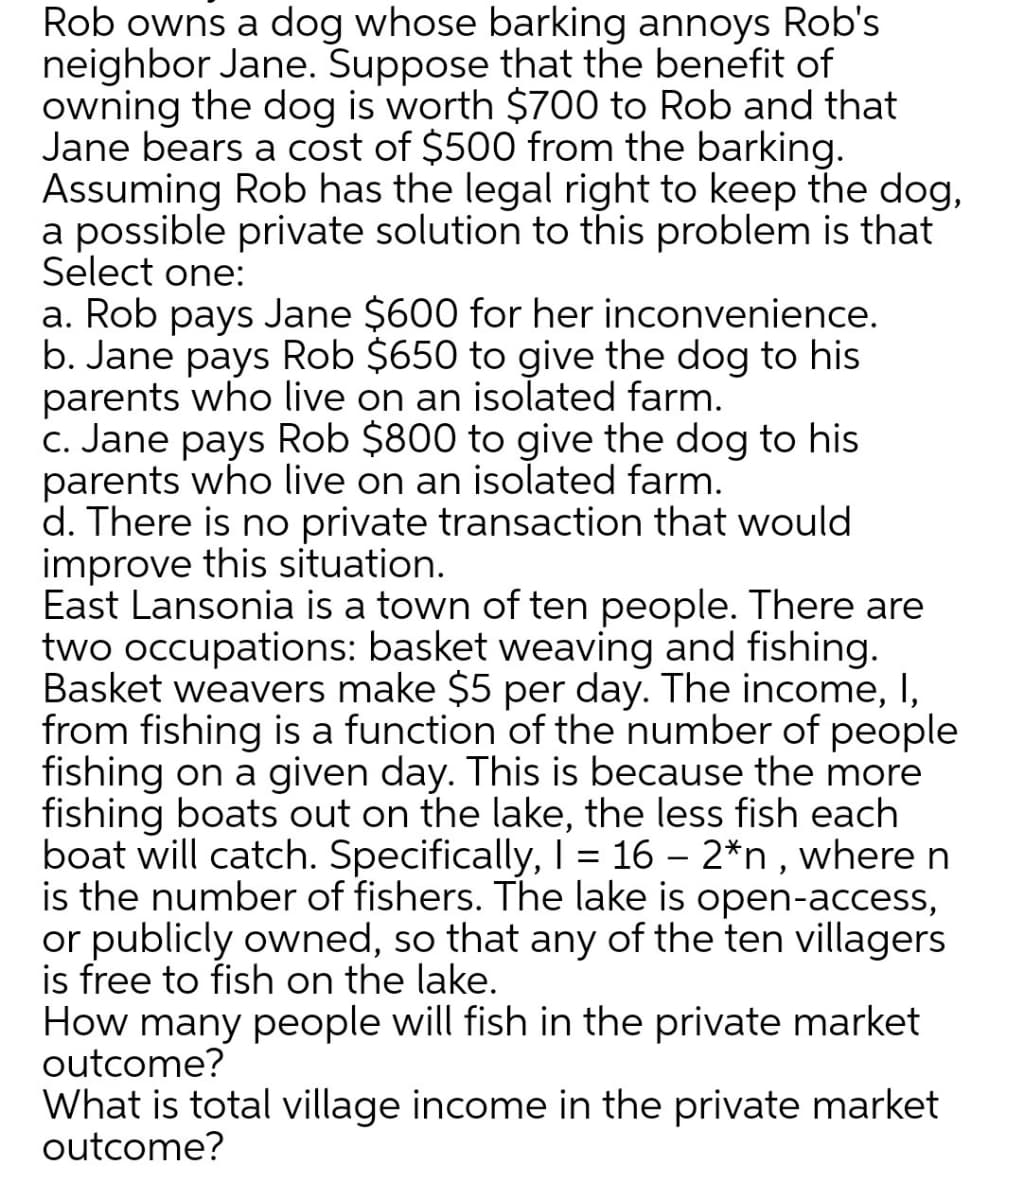 Rob owns a dog whose barking annoys Rob's
neighbor Jane. Suppose that the benefit of
owning the dog is worth $700 to Rob and that
Jane bears a cost of $500 from the barking.
Assuming Rob has the legal right to keep the dog,
a possible private solution to this problem is that
Select one:
a. Rob pays Jane $600 for her inconvenience.
b. Jane pays Rob $650 to give the dog to his
parents who live on an isolated farm.
c. Jane pays Rob $800 to give the dog to his
parents who live on an isolated farm.
d. There is no private transaction that would
improve this situation.
East Lansonia is a town of ten people. There are
two occupations: basket weaving and fishing.
Basket weavers make $5 per day. The income, I,
from fishing is a function of the number of people
fishing on a given day. This is because the more
fishing boats out on the lake, the less fish each
boat will catch. Specifically, I = 16 – 2*n , where n
is the number of fishers. The lake is open-access,
or publicly owned, so that any of the ten villagers
is free to fish on the lake.
How many people will fish in the private market
outcome?
What is total village income in the private market
outcome?
